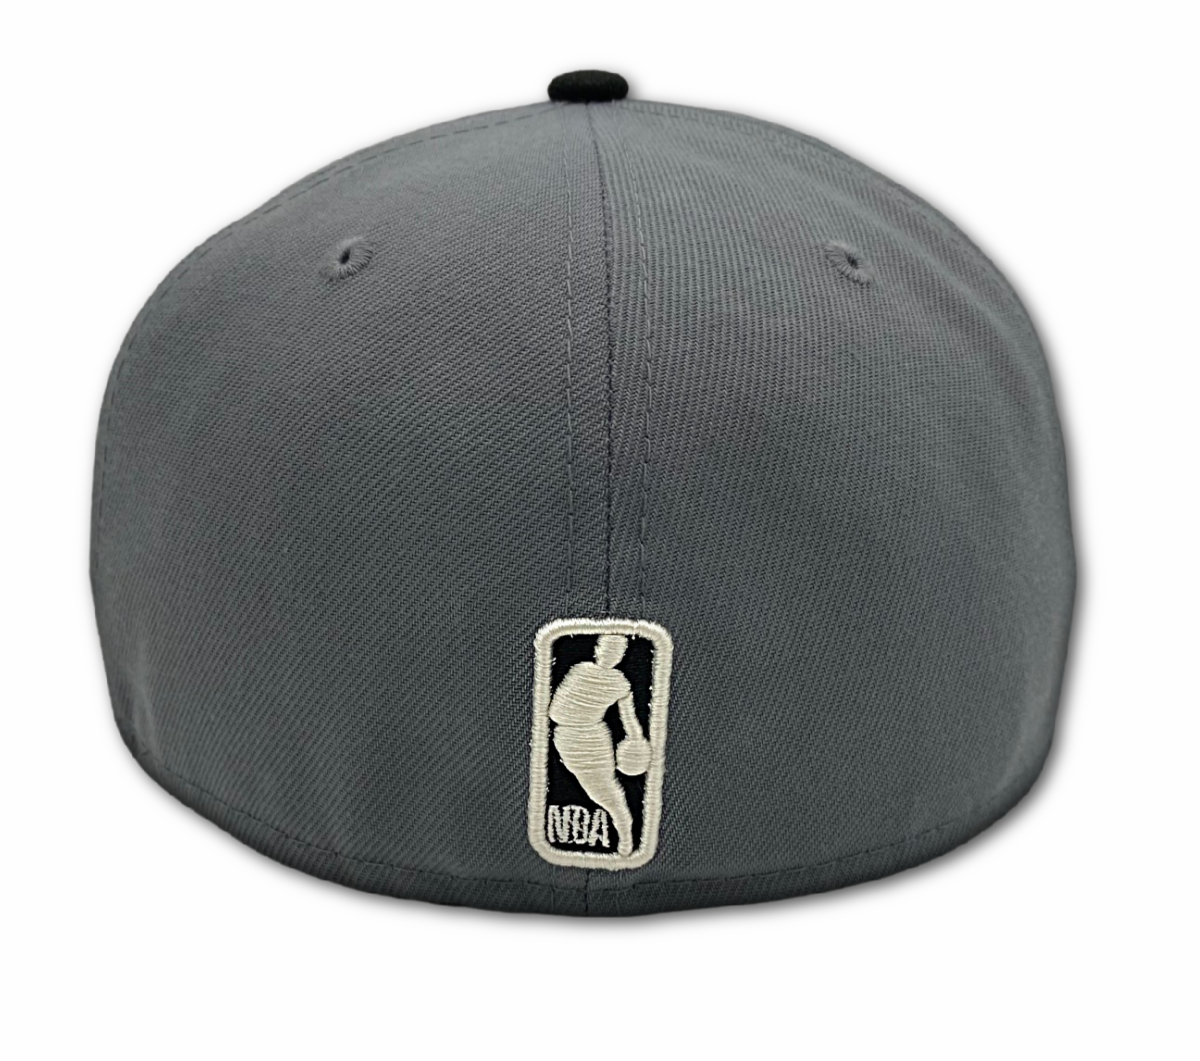 Sacramento Kings New Era 2TONE COLOR PACK 59FIFTY Fitted Hat nvsoccer.com The Coliseum